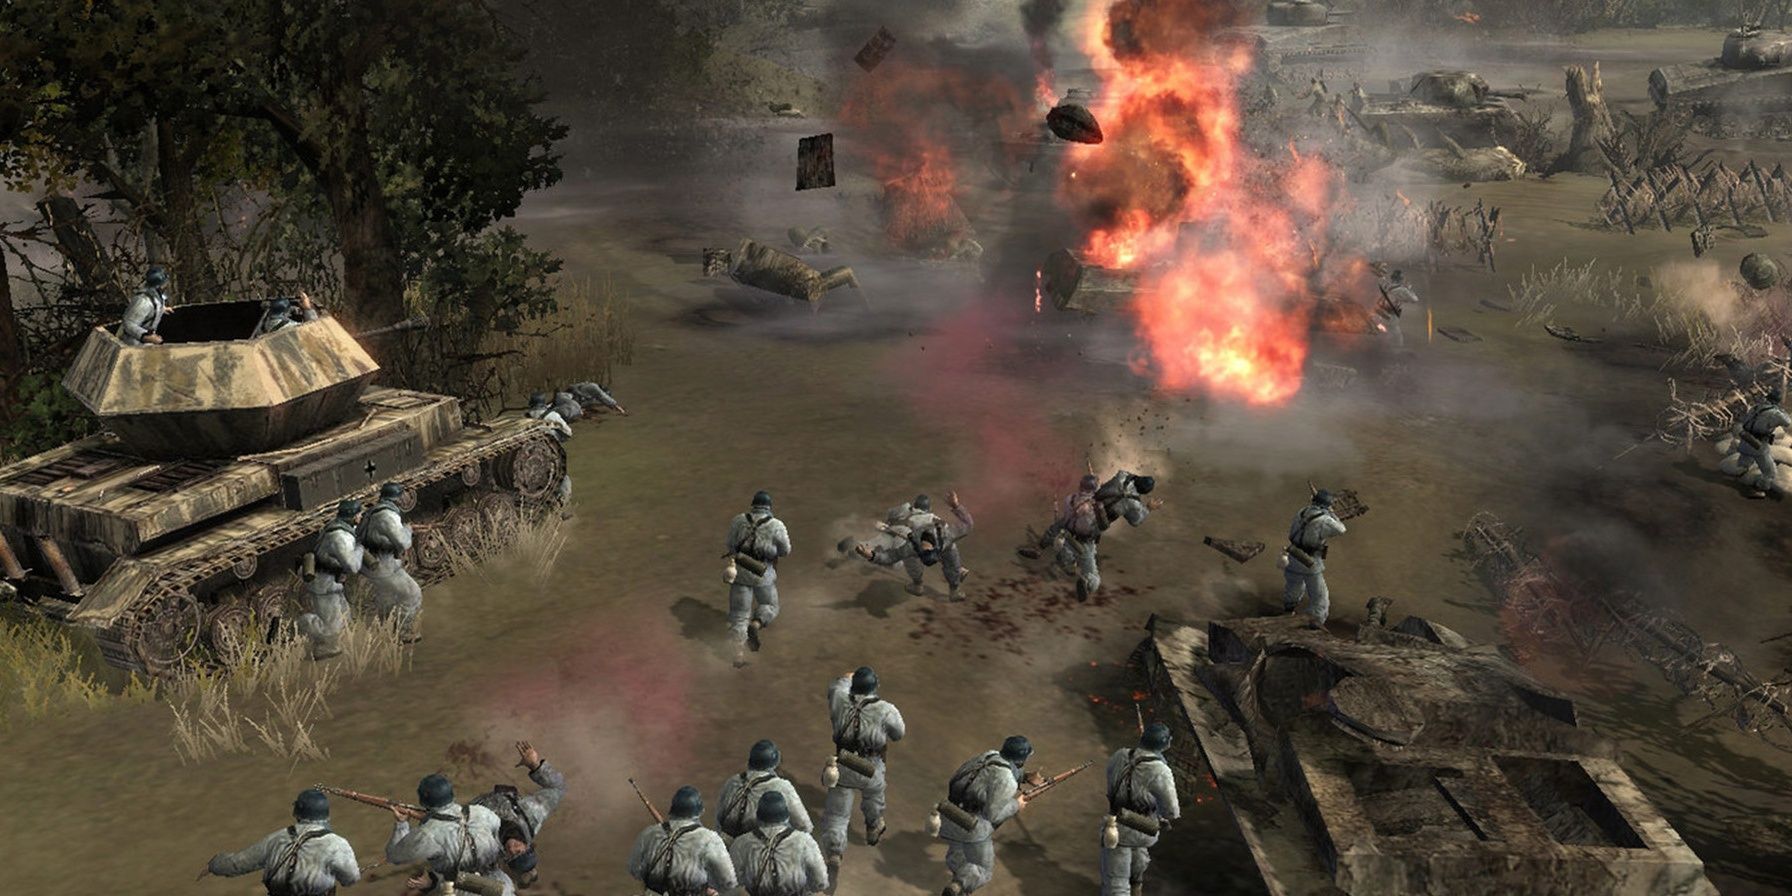 Company of Heroes Cropped battle scene with tank